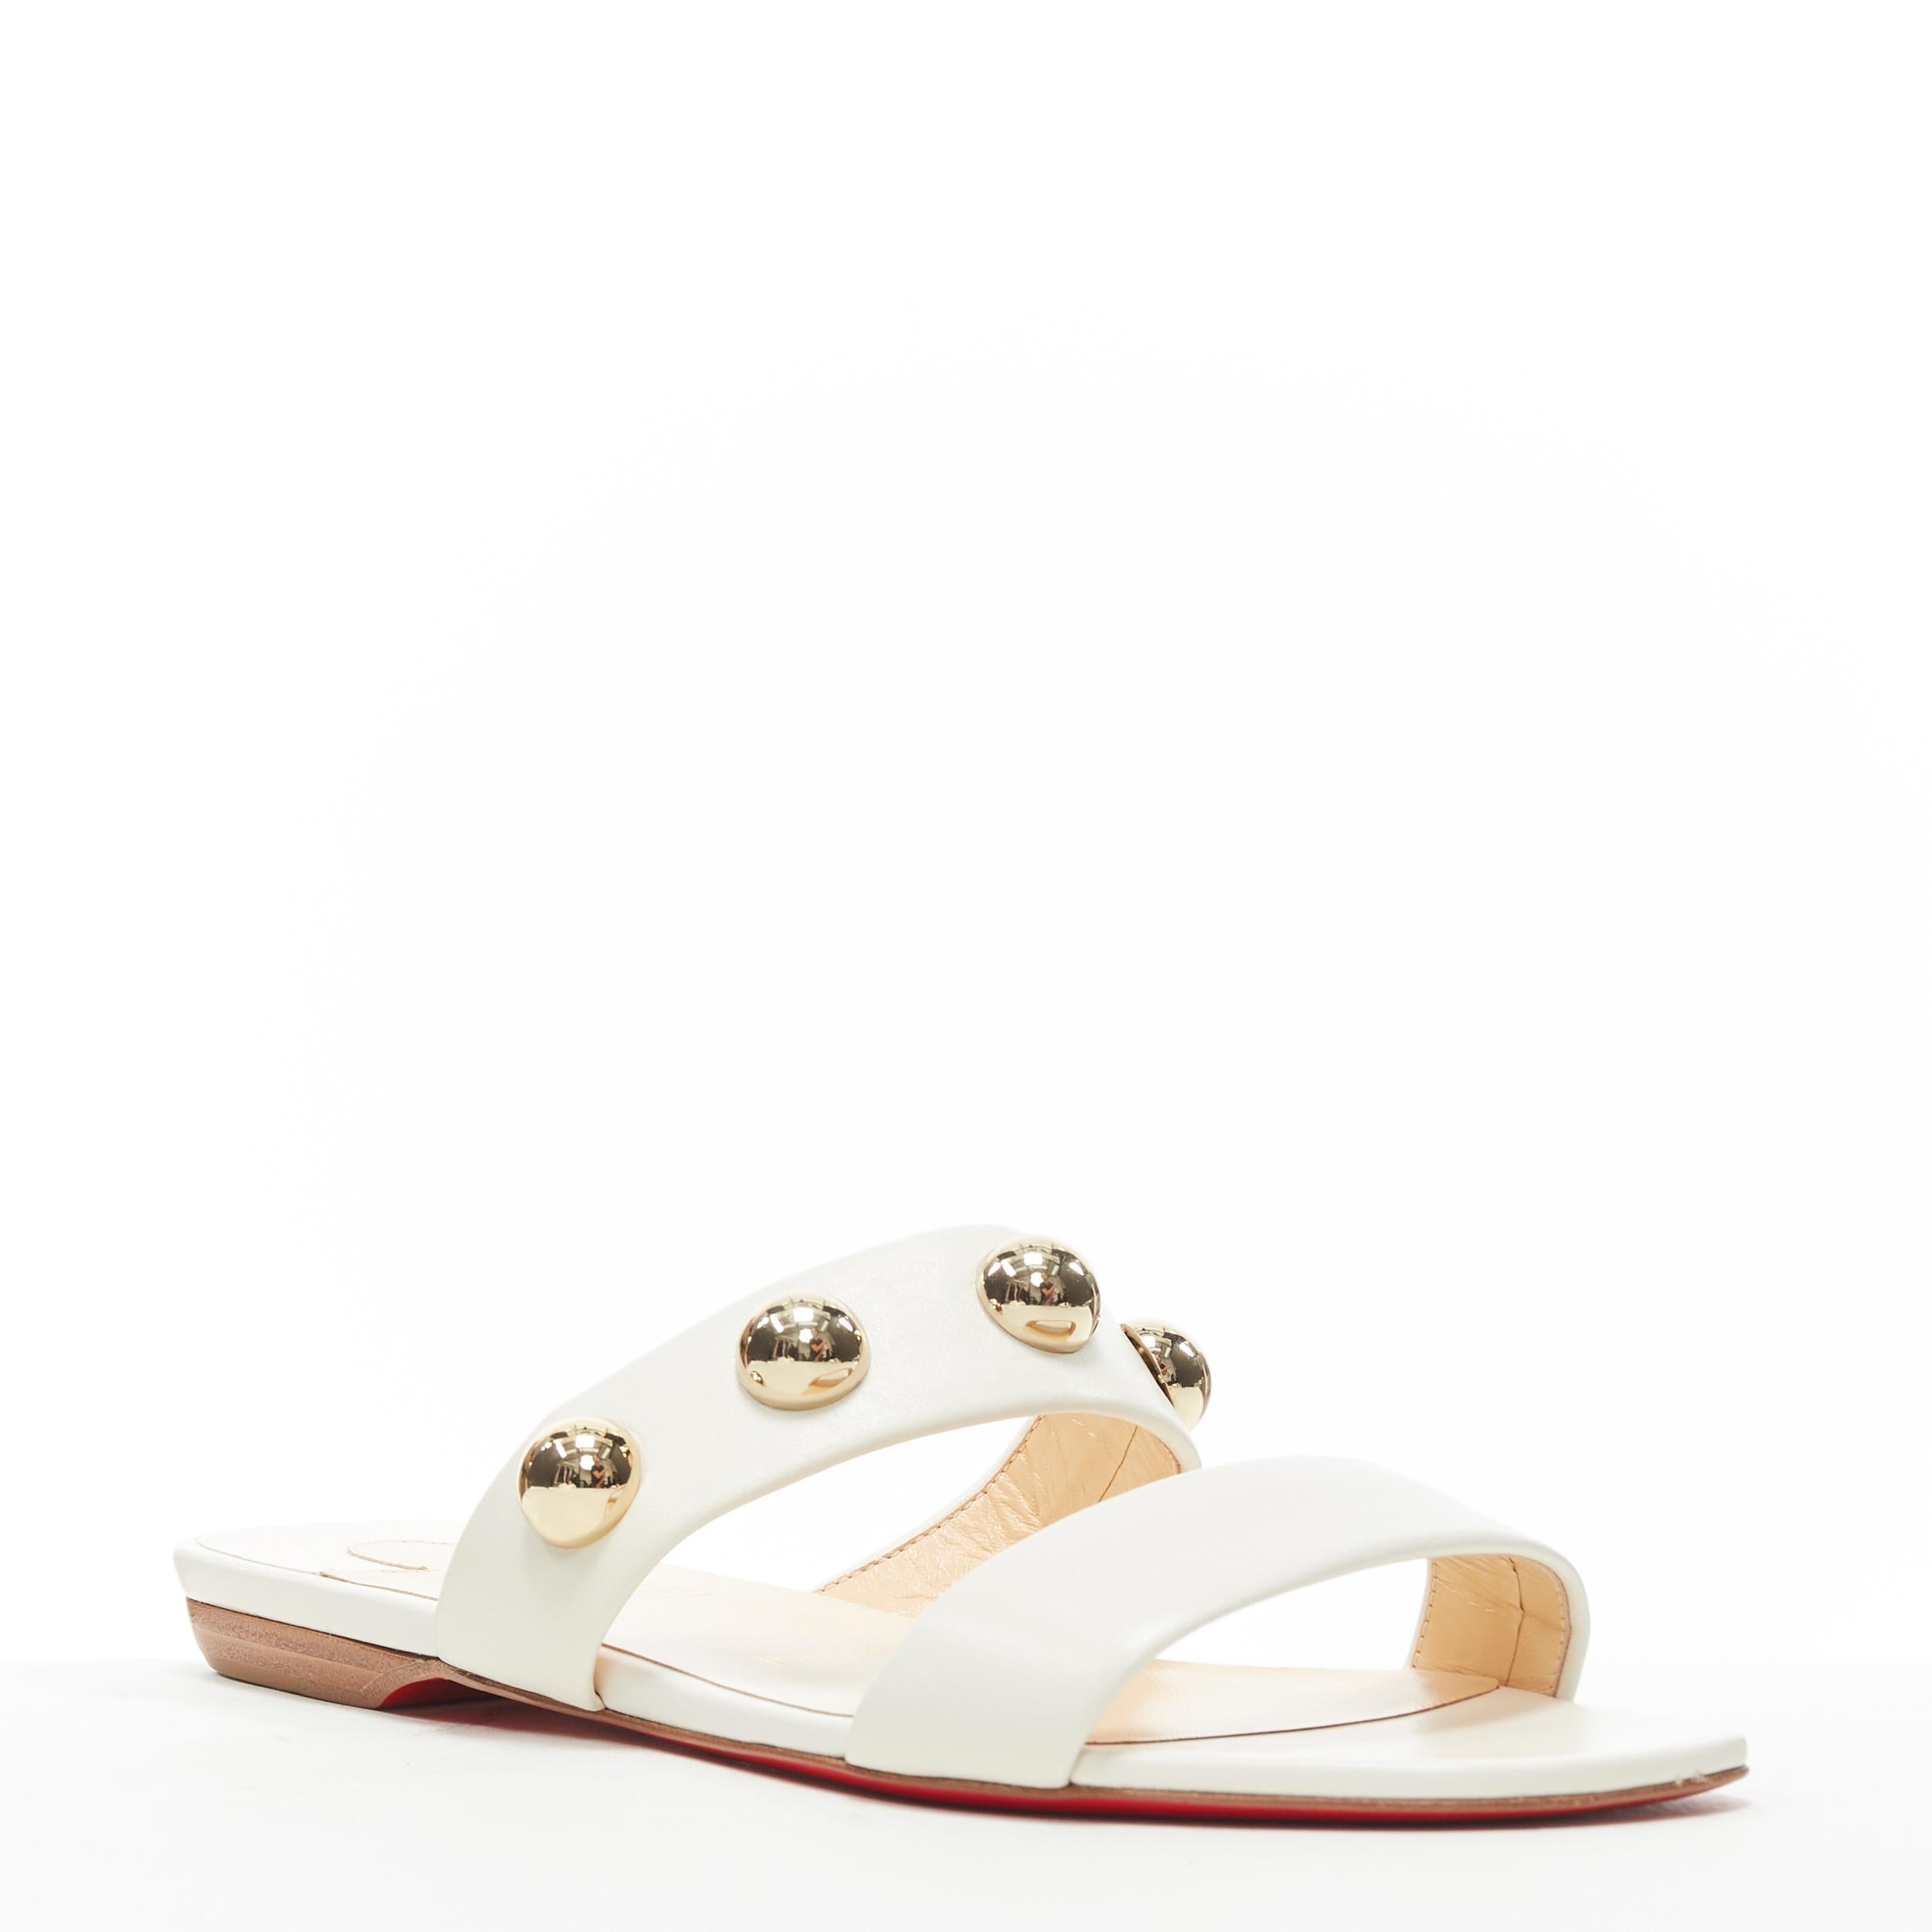 new CHRISTIAN LOUBOUTIN gold dome sphere stud white leather flat sandals EU37.5 
Reference: TGAS/B00747 
Brand: Christian Louboutin 
Designer: Christian Louboutin 
Model: White leather stud sandals 
Material: Leather 
Color: White 
Pattern: Solid